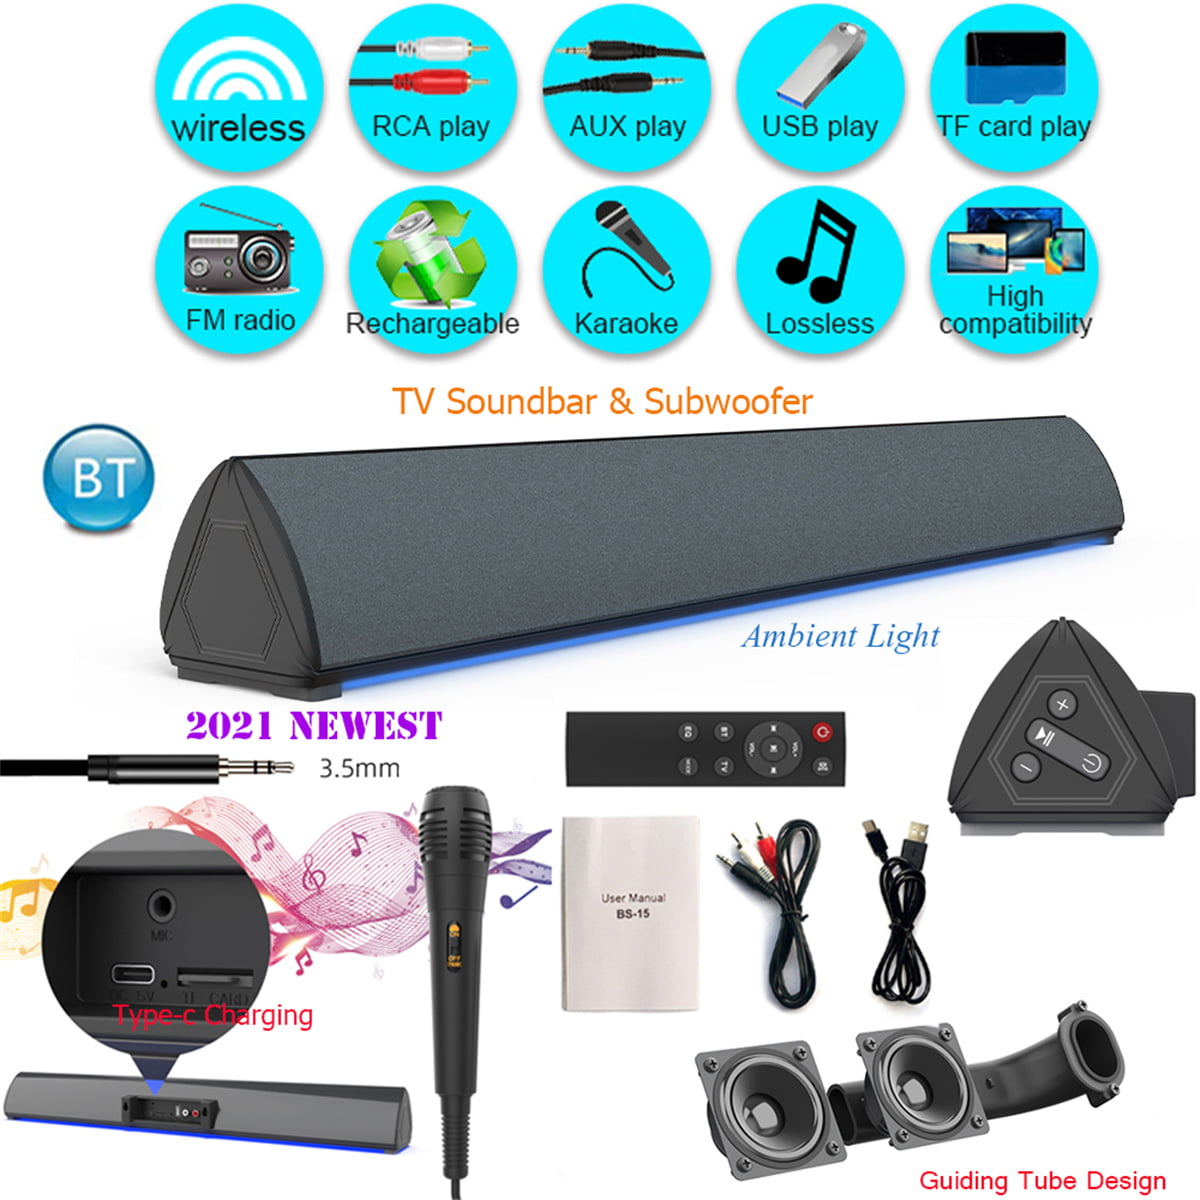 2021 New Sound Bar, Ambient Light, 20W Wireless Soundbar Home Theater Audio, Bluetooth TV Speaker with Remote 4 Built-in with Karaoke Microphone, FM Radio, Rechargeable, Black - Walmart.com